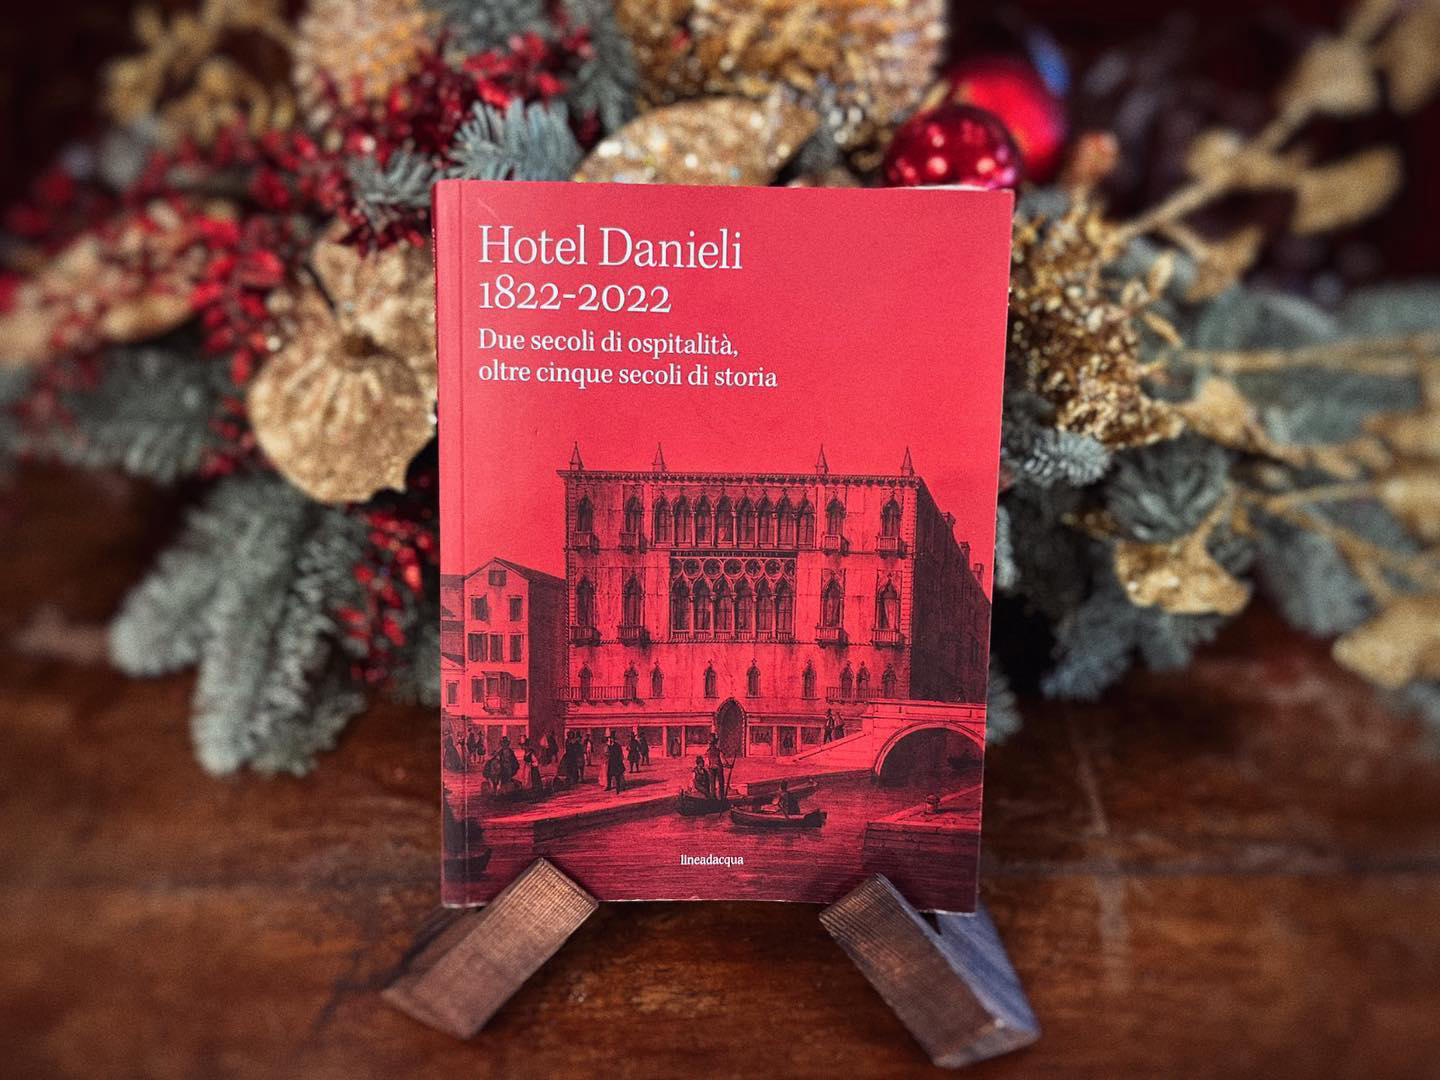 Hotel Danieli, Venice - Hundreds are the stories and anecdotes that gravitate around the historic an